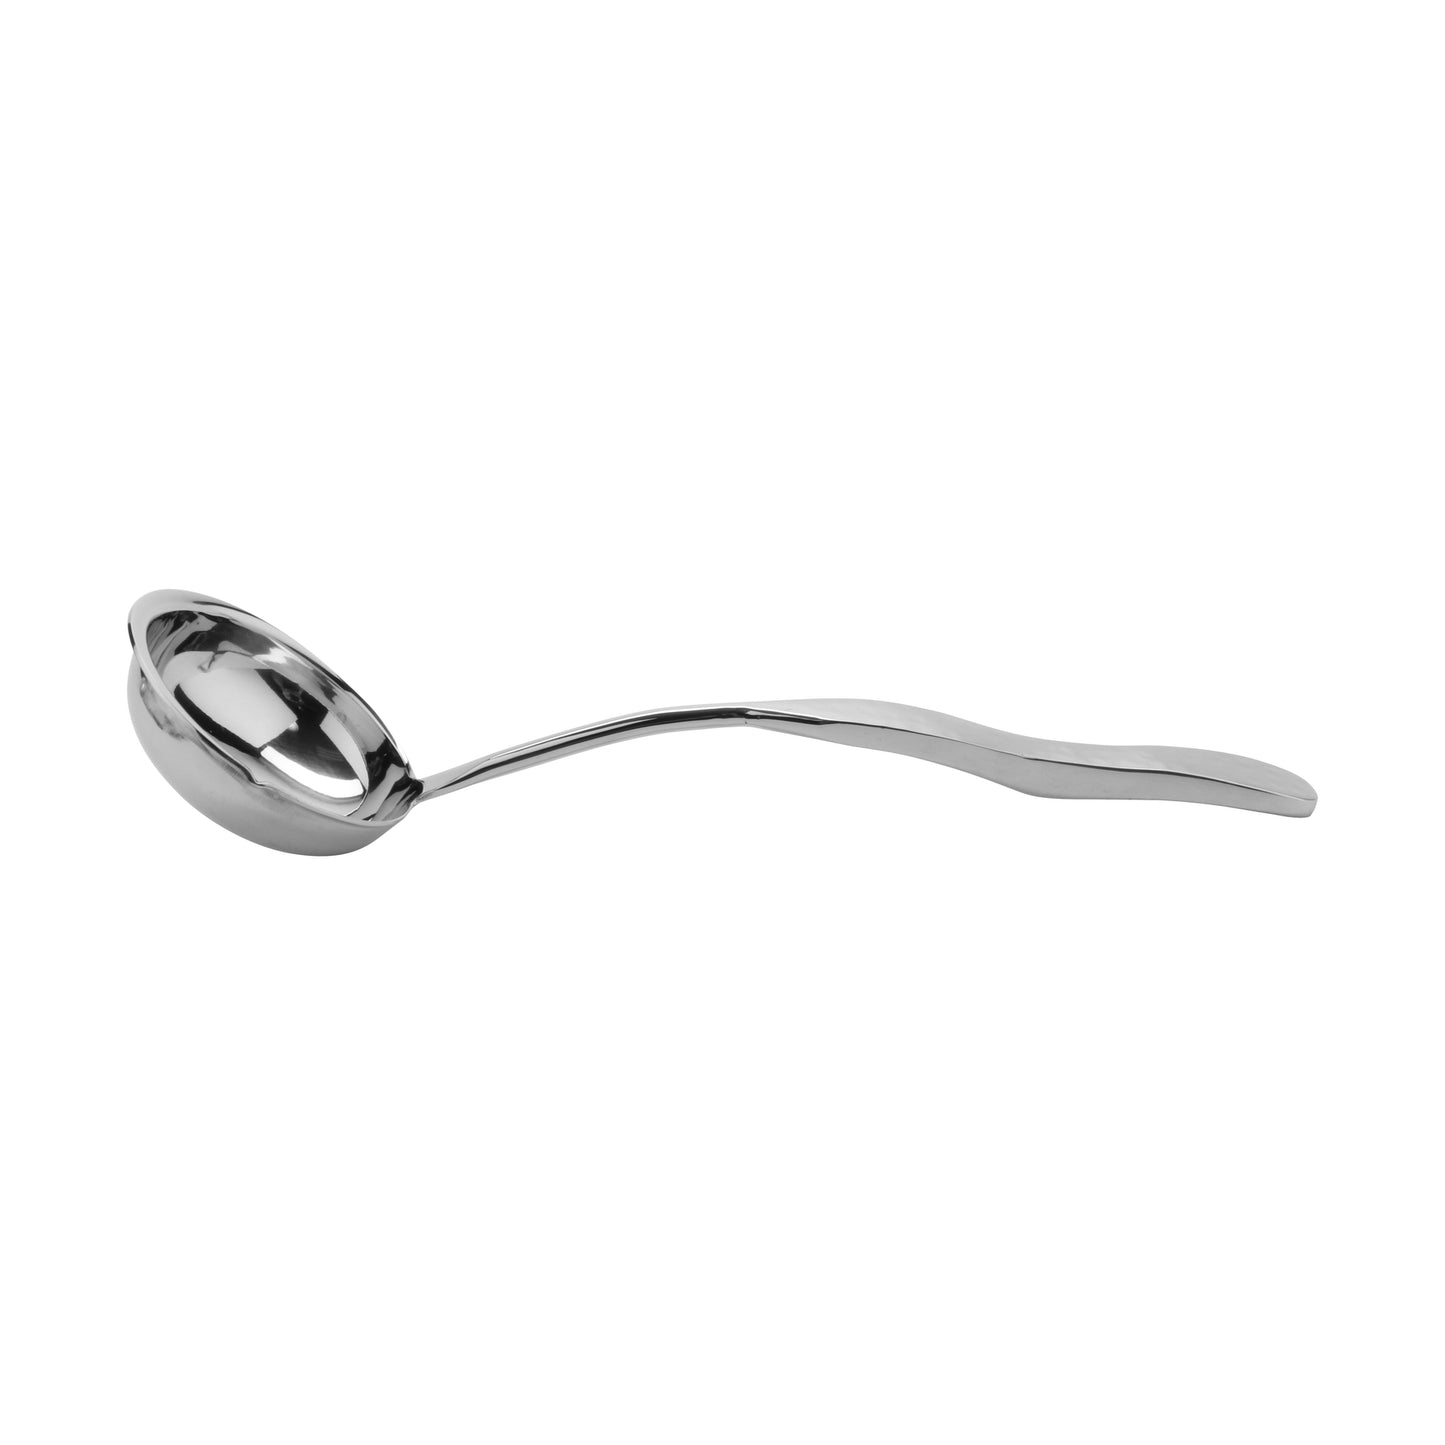 2 oz., 10" Stainless Steel Solid Soup Ladle w/ Pounded Finish